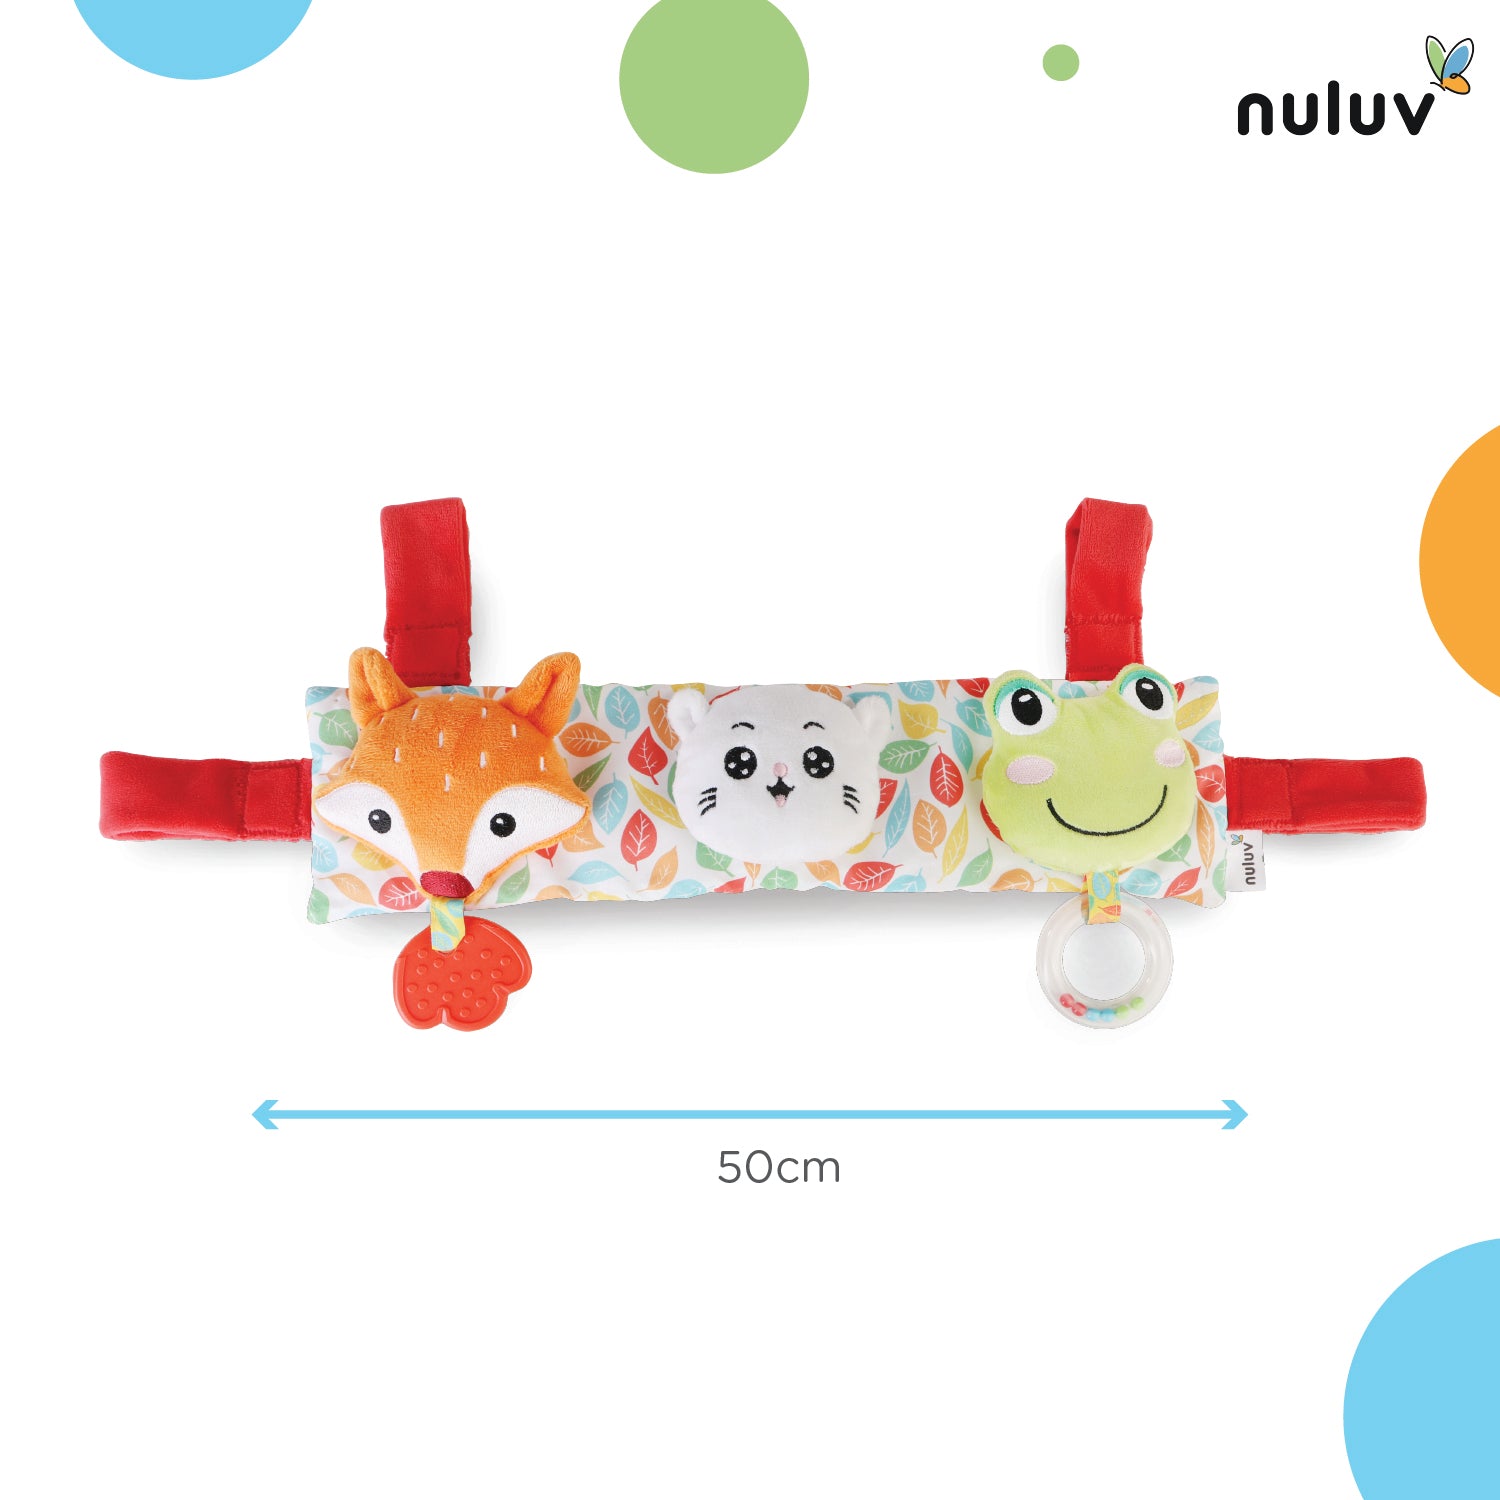 Nuluv Stroller-Cot Plush Toy, Rattle Toys For Crib, Pram, For 0-12 Months